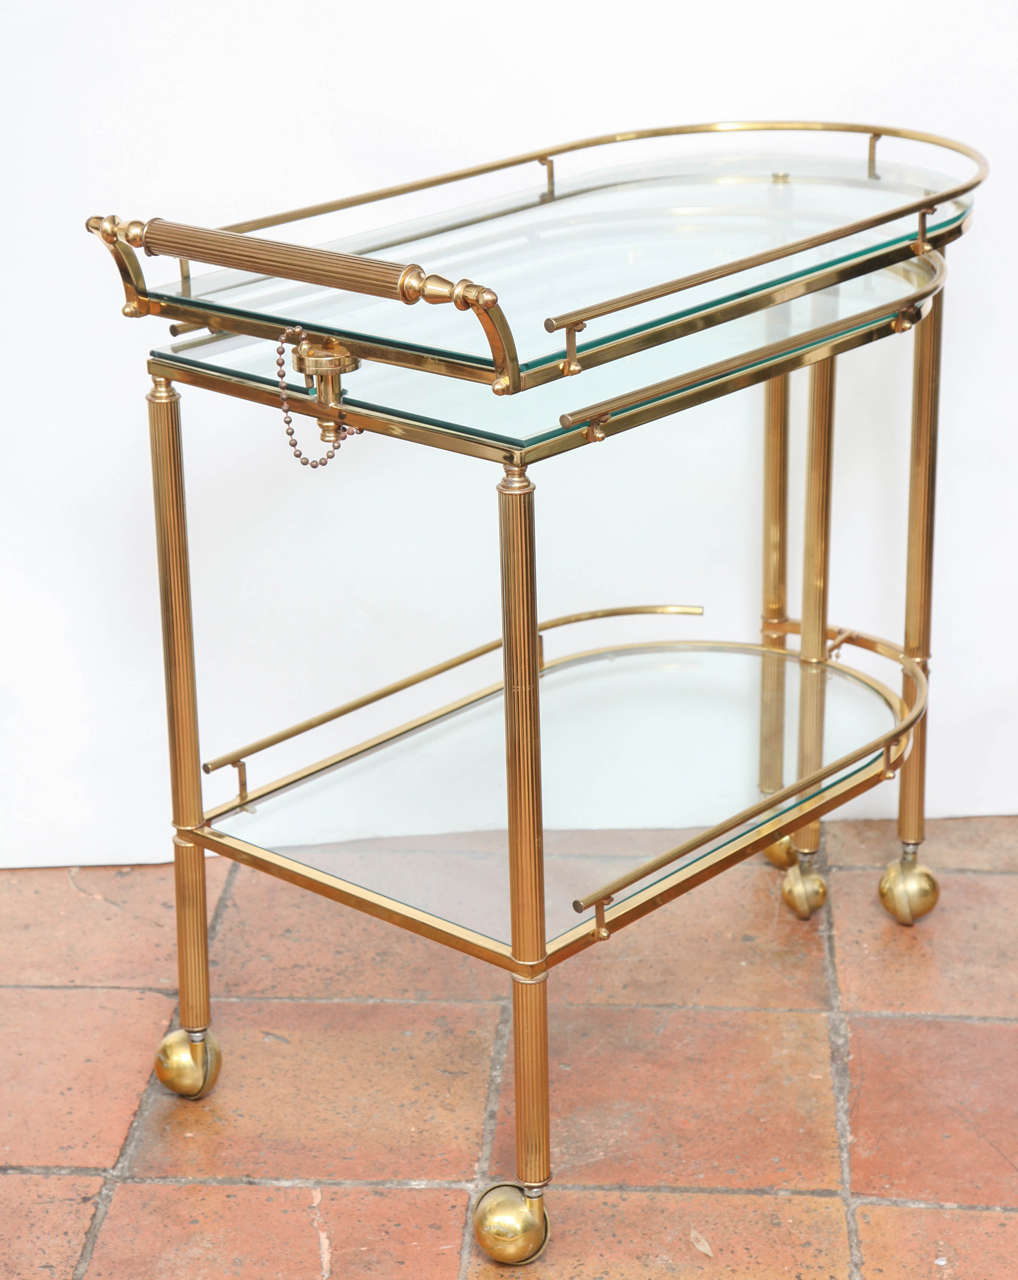 A useful articulated serving cart that can be used for many different occasions. The lower half can be unattached and swing out from the top to allow for more serving space. Lower space: 25.5